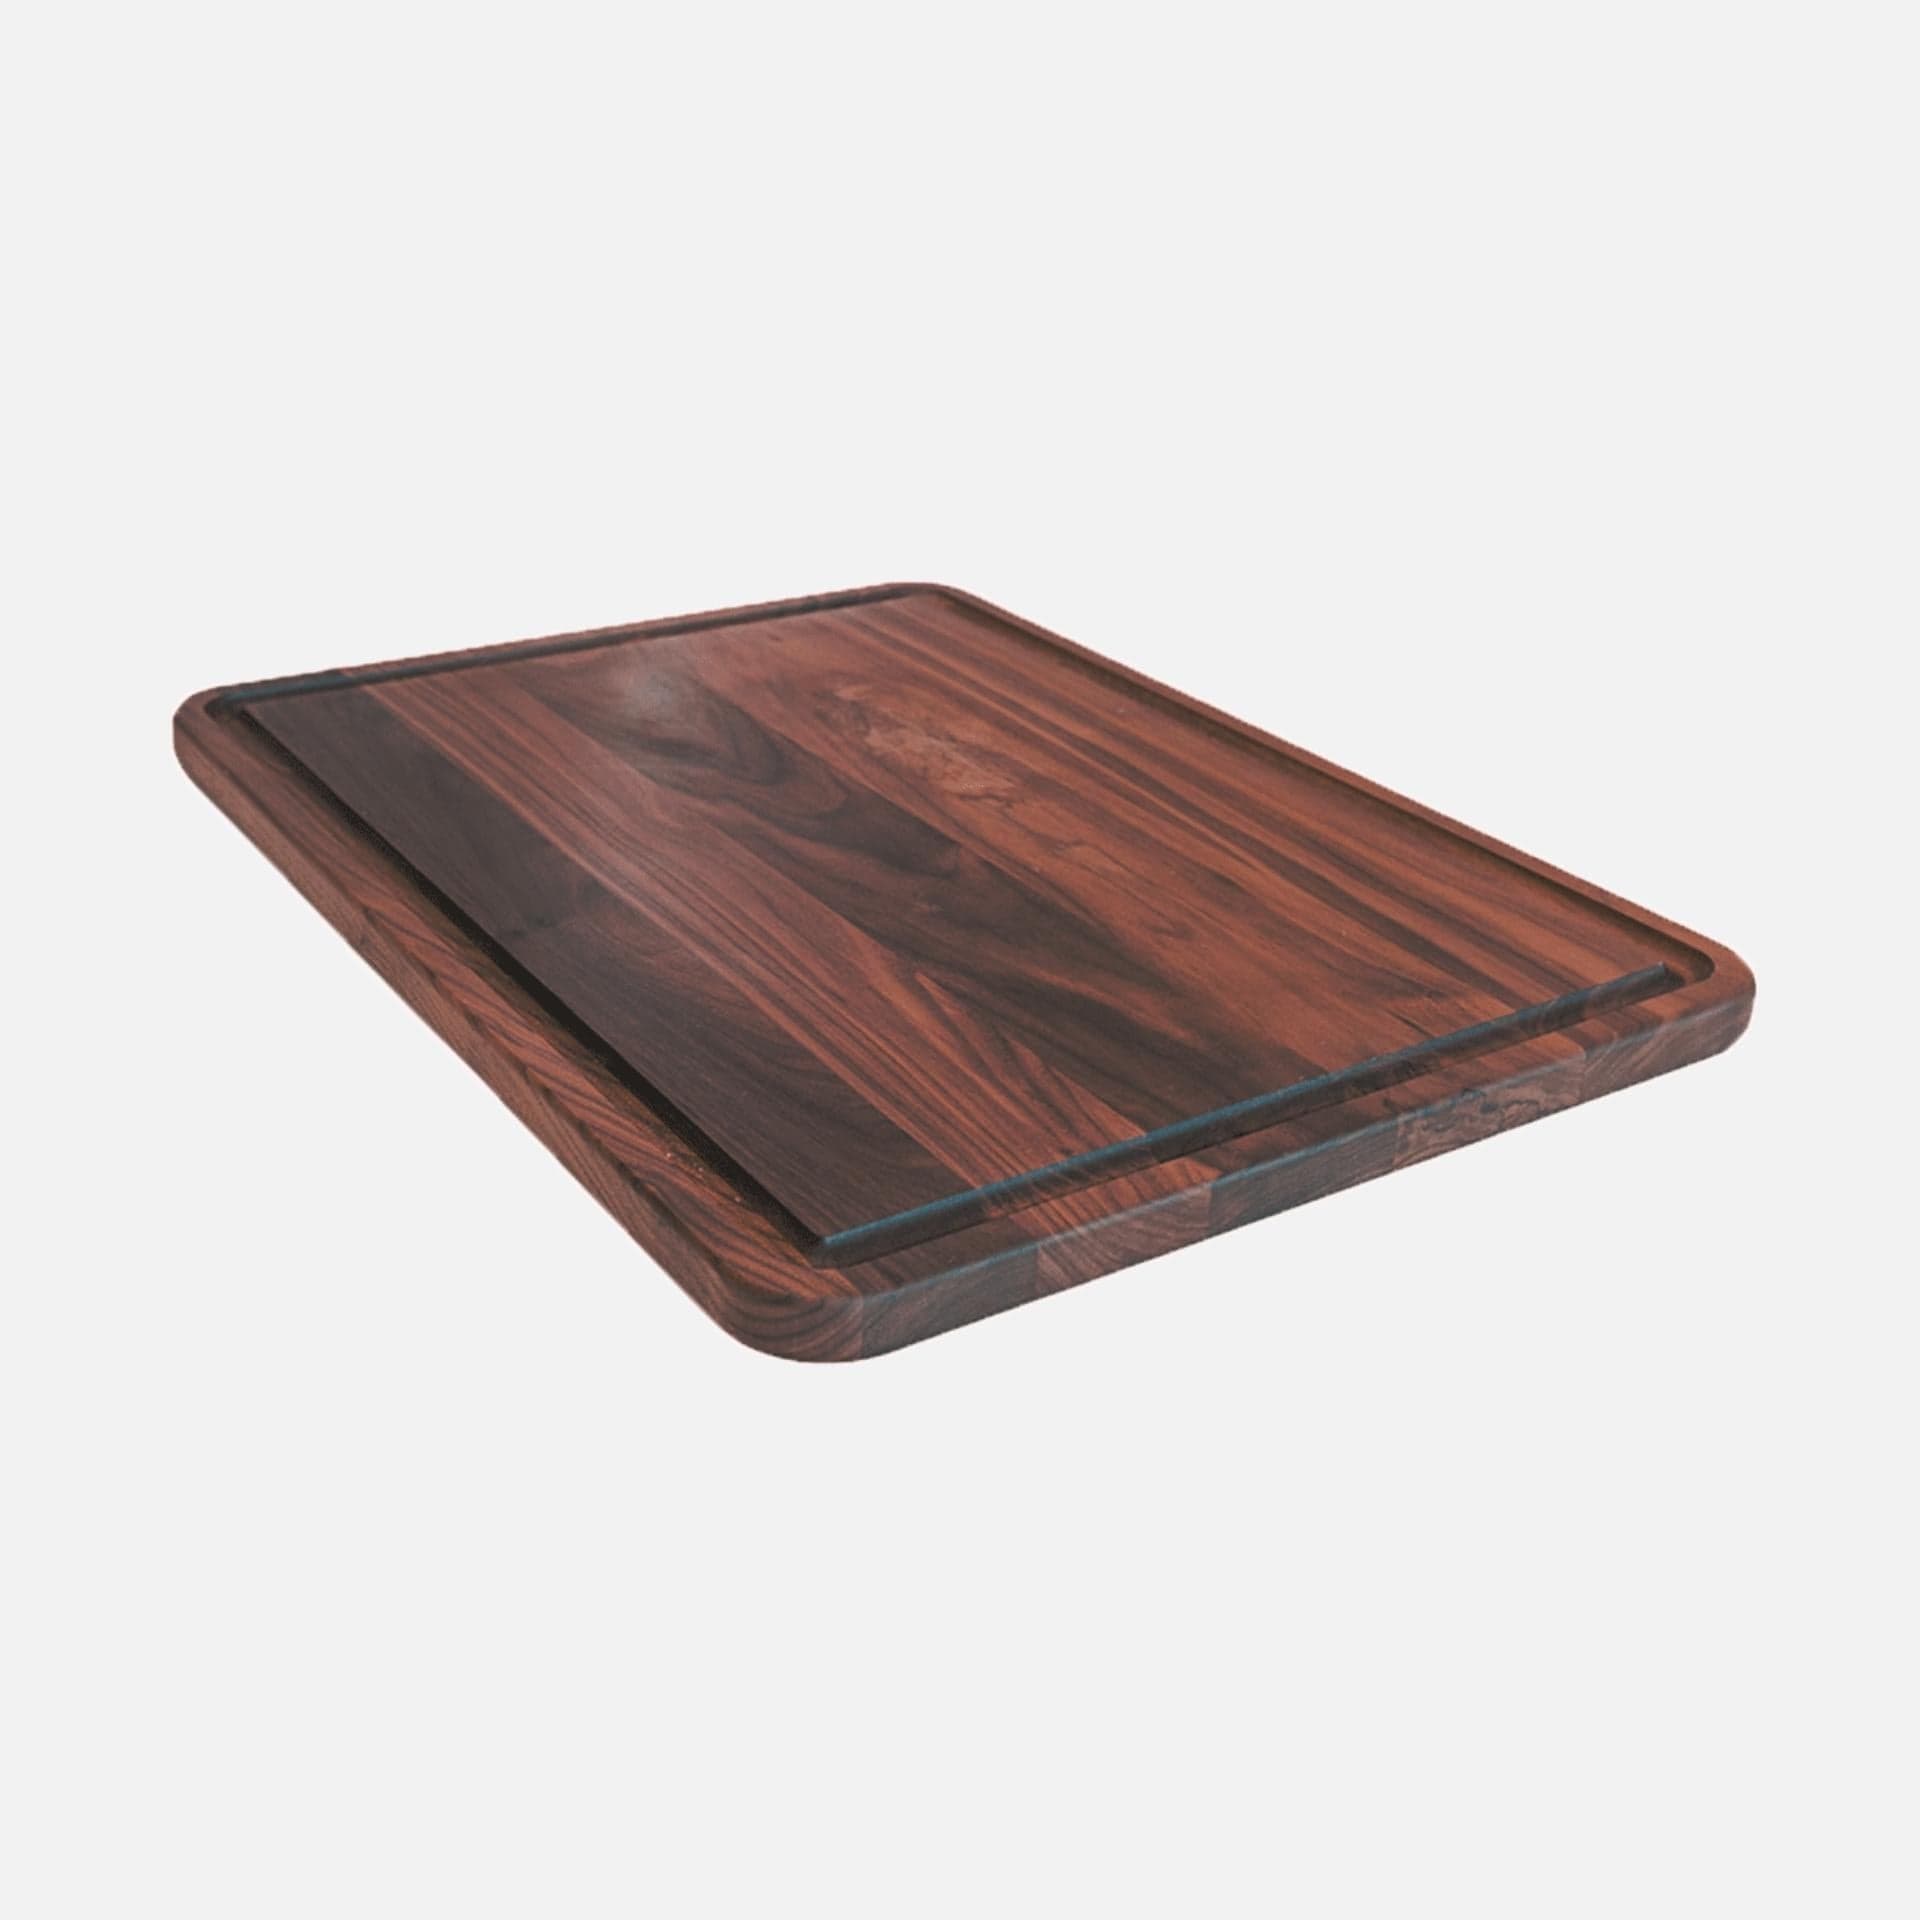 Wood Cutting Board Large Walnut 17x11 Inch Reversible With Handles